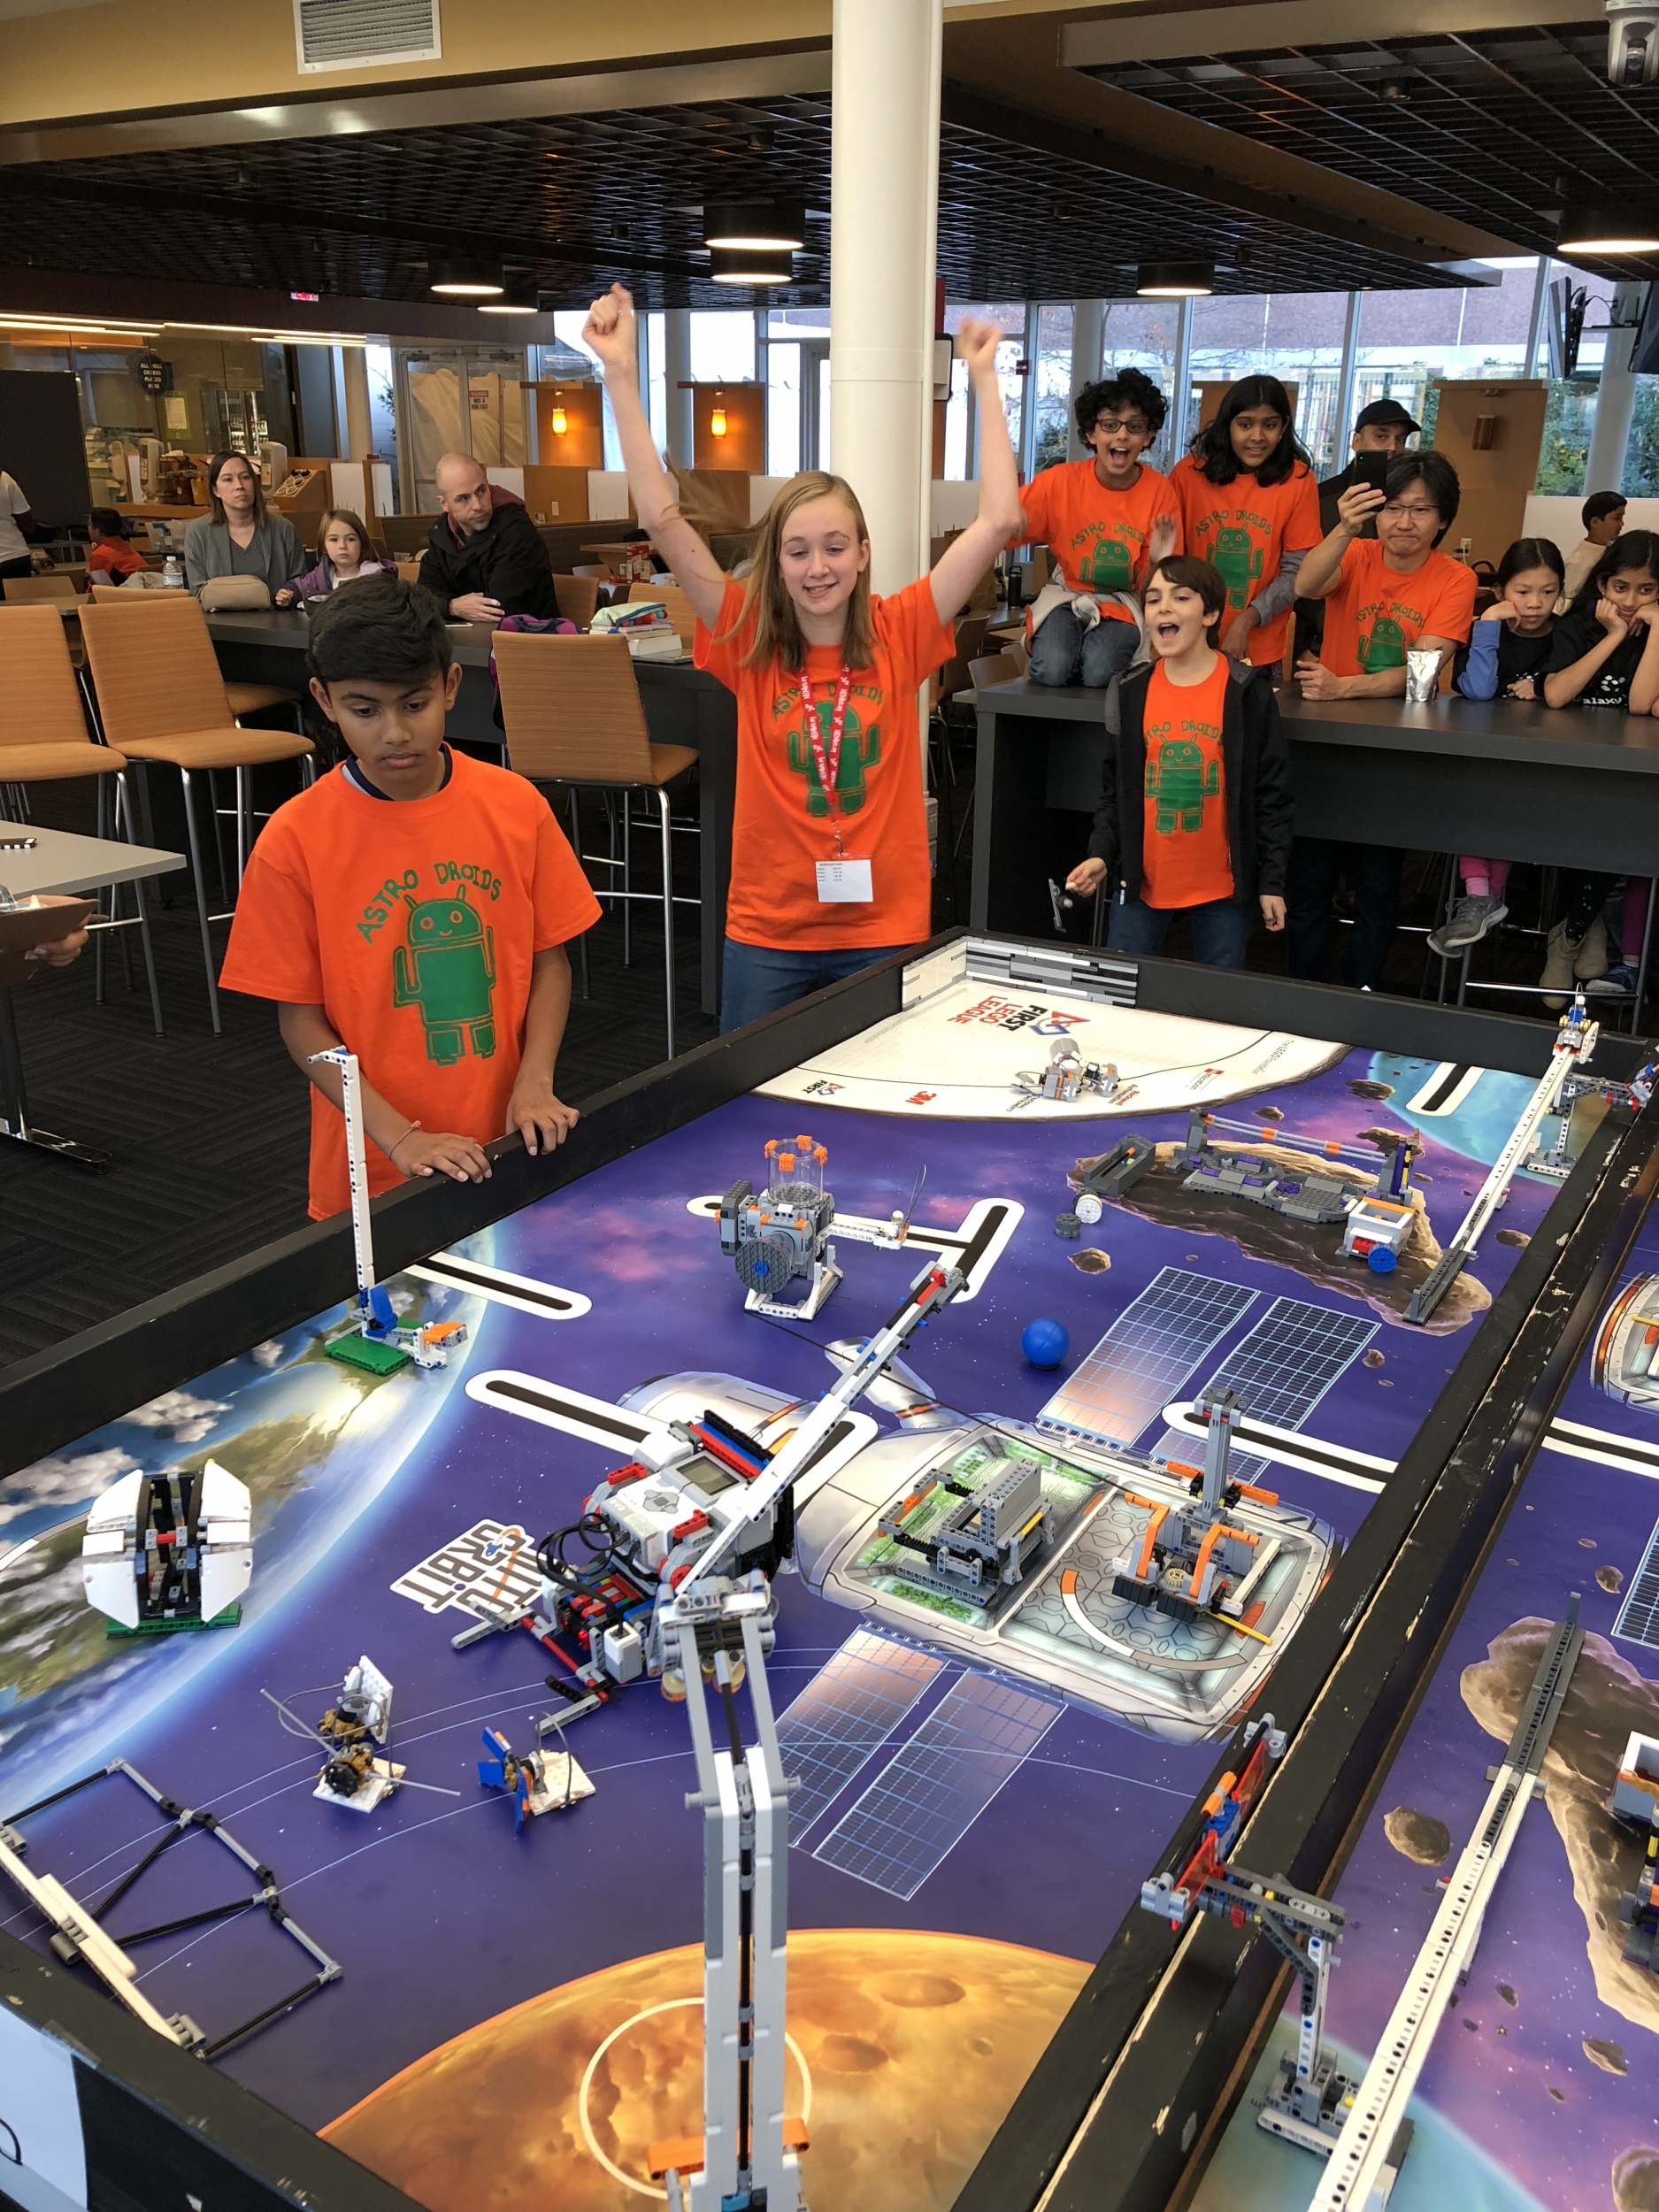 A FIRST LEGO League team strives to complete their space mission during the scrimmage using the LEGO robots they built over the fall season. Photo: David Radue